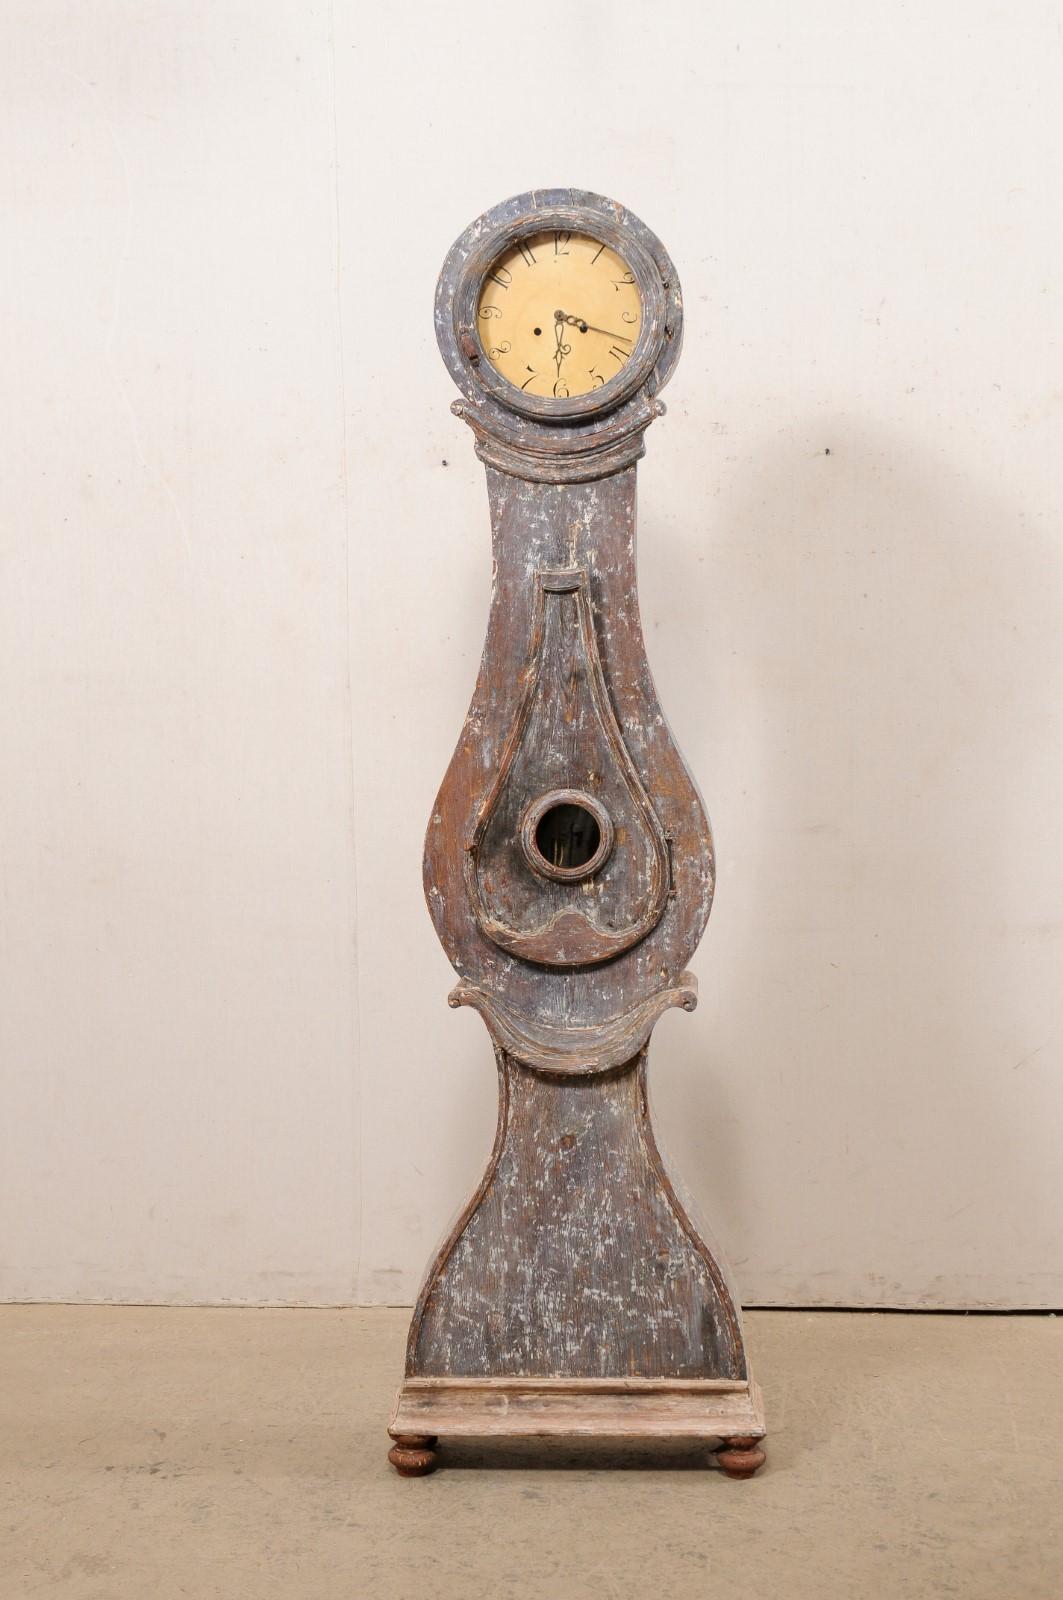 A 19th century Swedish painted Fryksdahl clock scraped to it's original finish. This antique Fryksdahl clock from Sweden has a rounded head, and retains its original metal face (with hand-painted numbers) & original clock movements. Gently carved